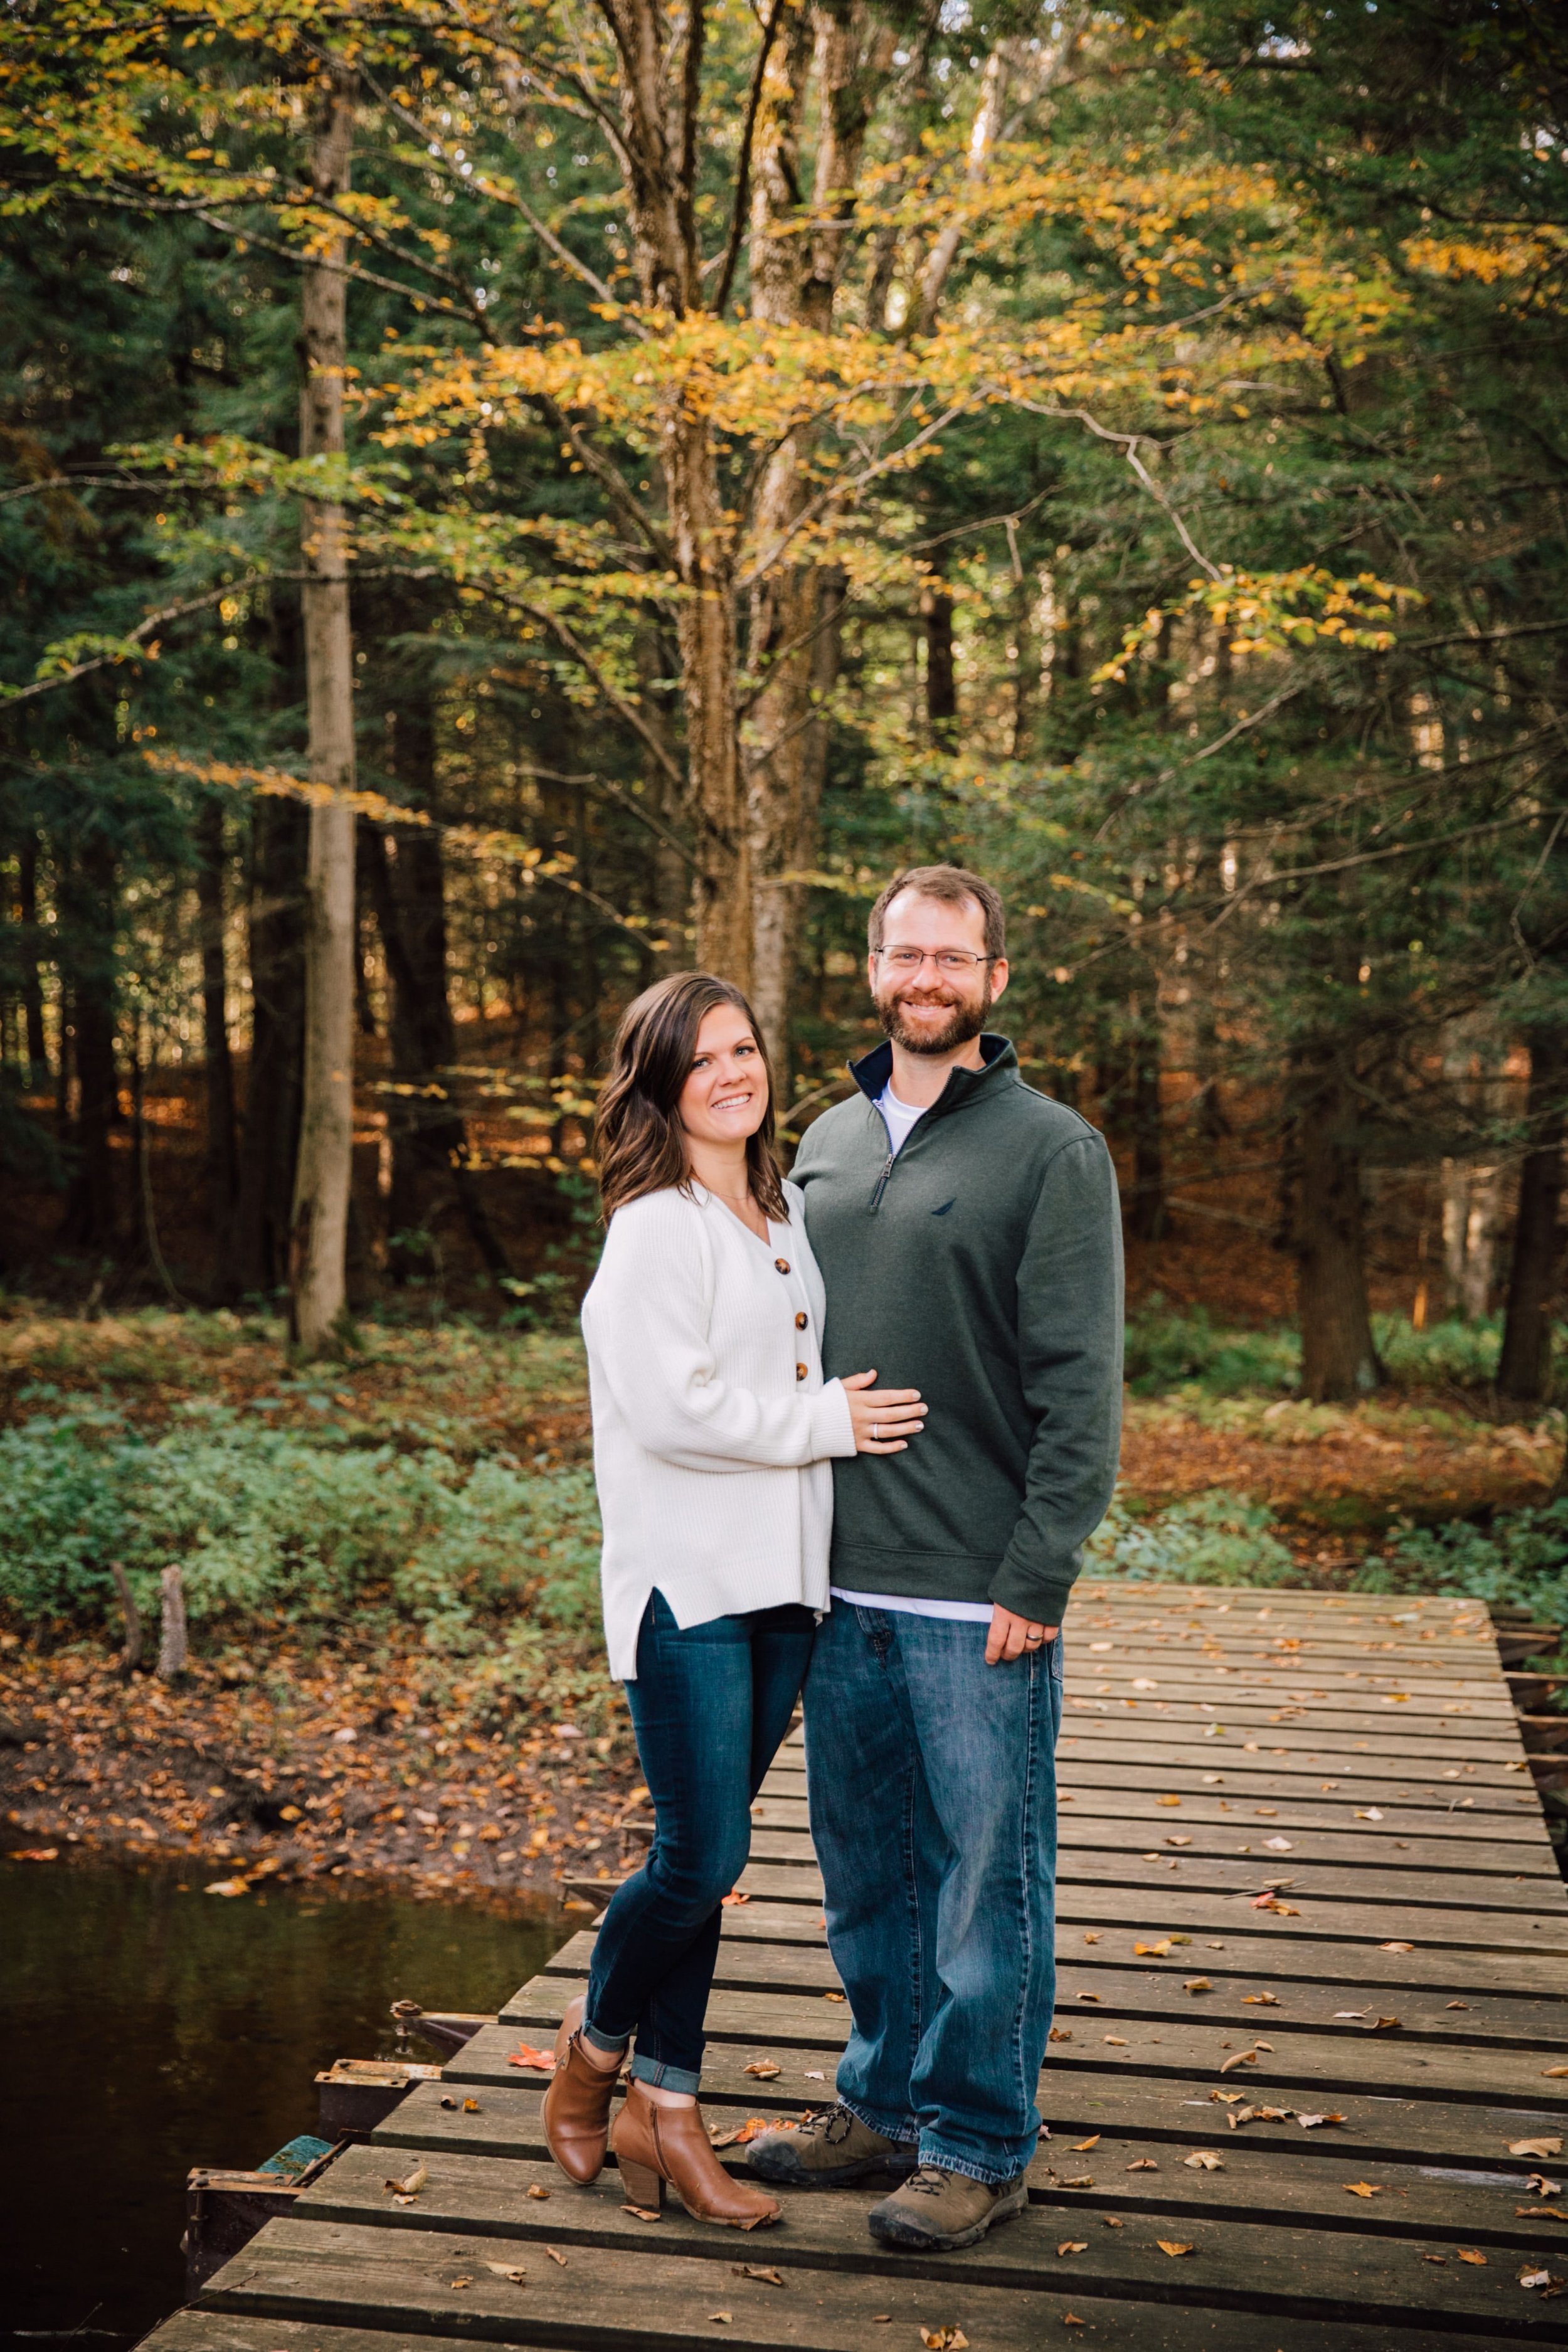  megan and barrett smile as they stand on a wooded bridge in the wooded area on their property during a backyard photoshoot to celebrate their wedding 